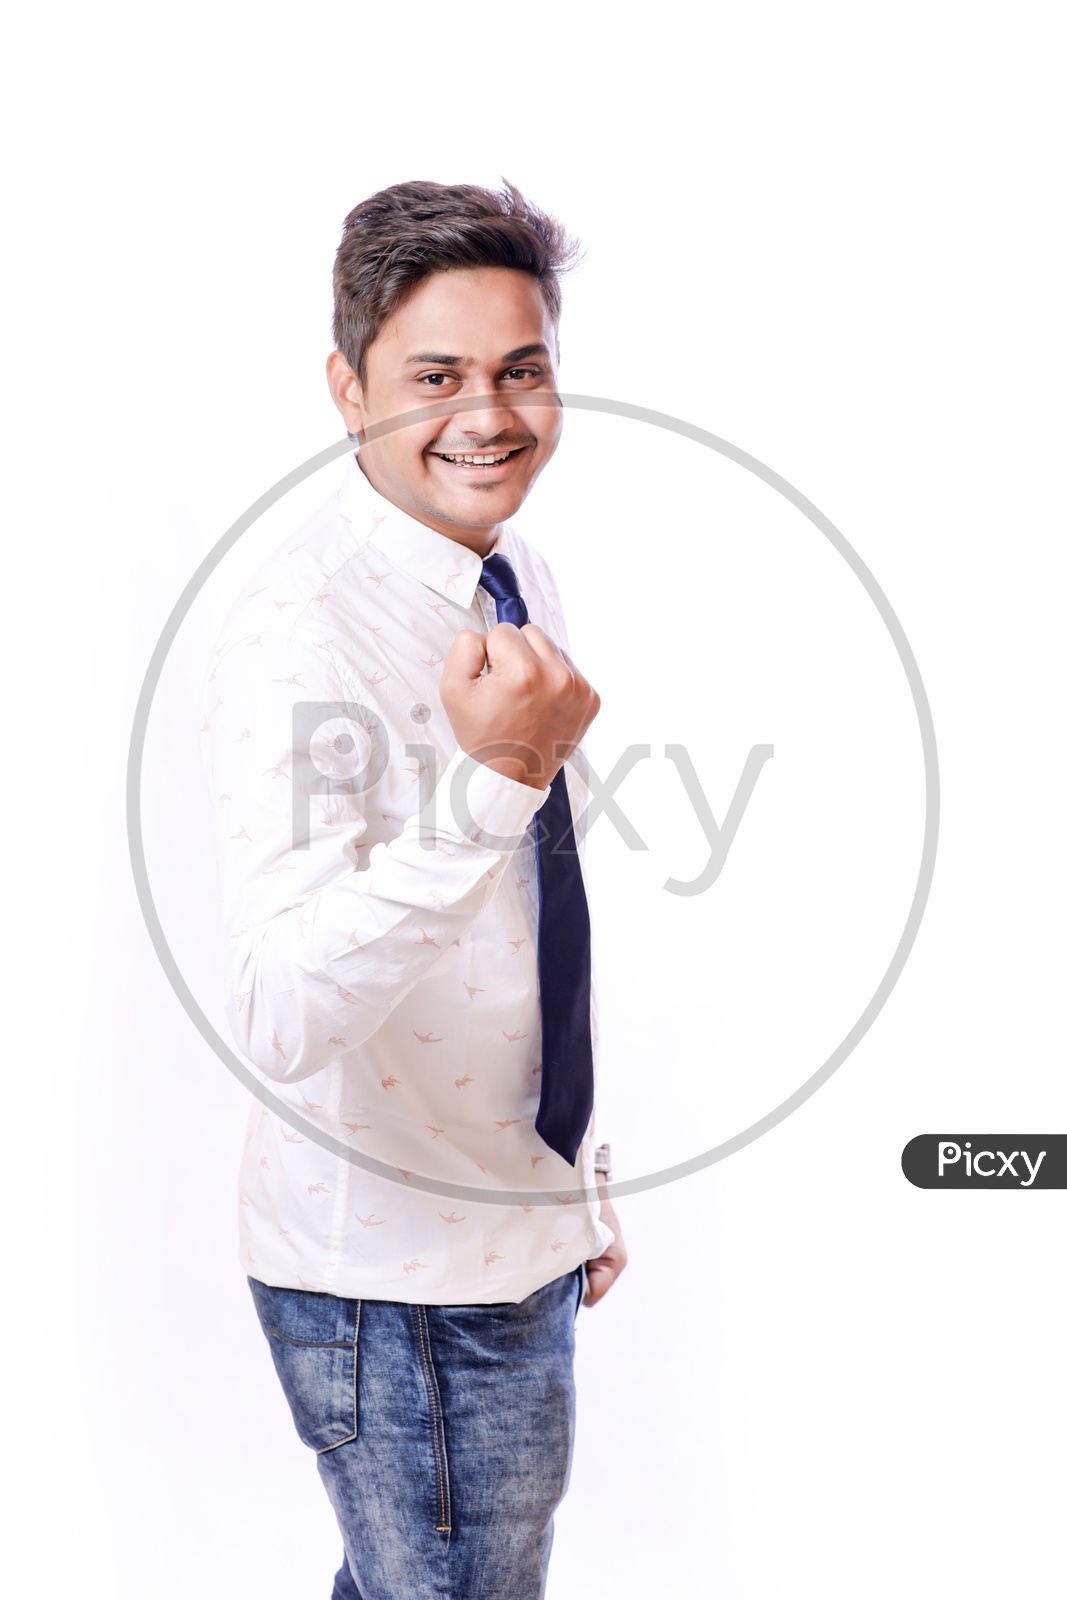 Portrait Of A Confident Young man in Formal wear  With Expression and Hand Signs  and Gestures On An Isolated  White  Background